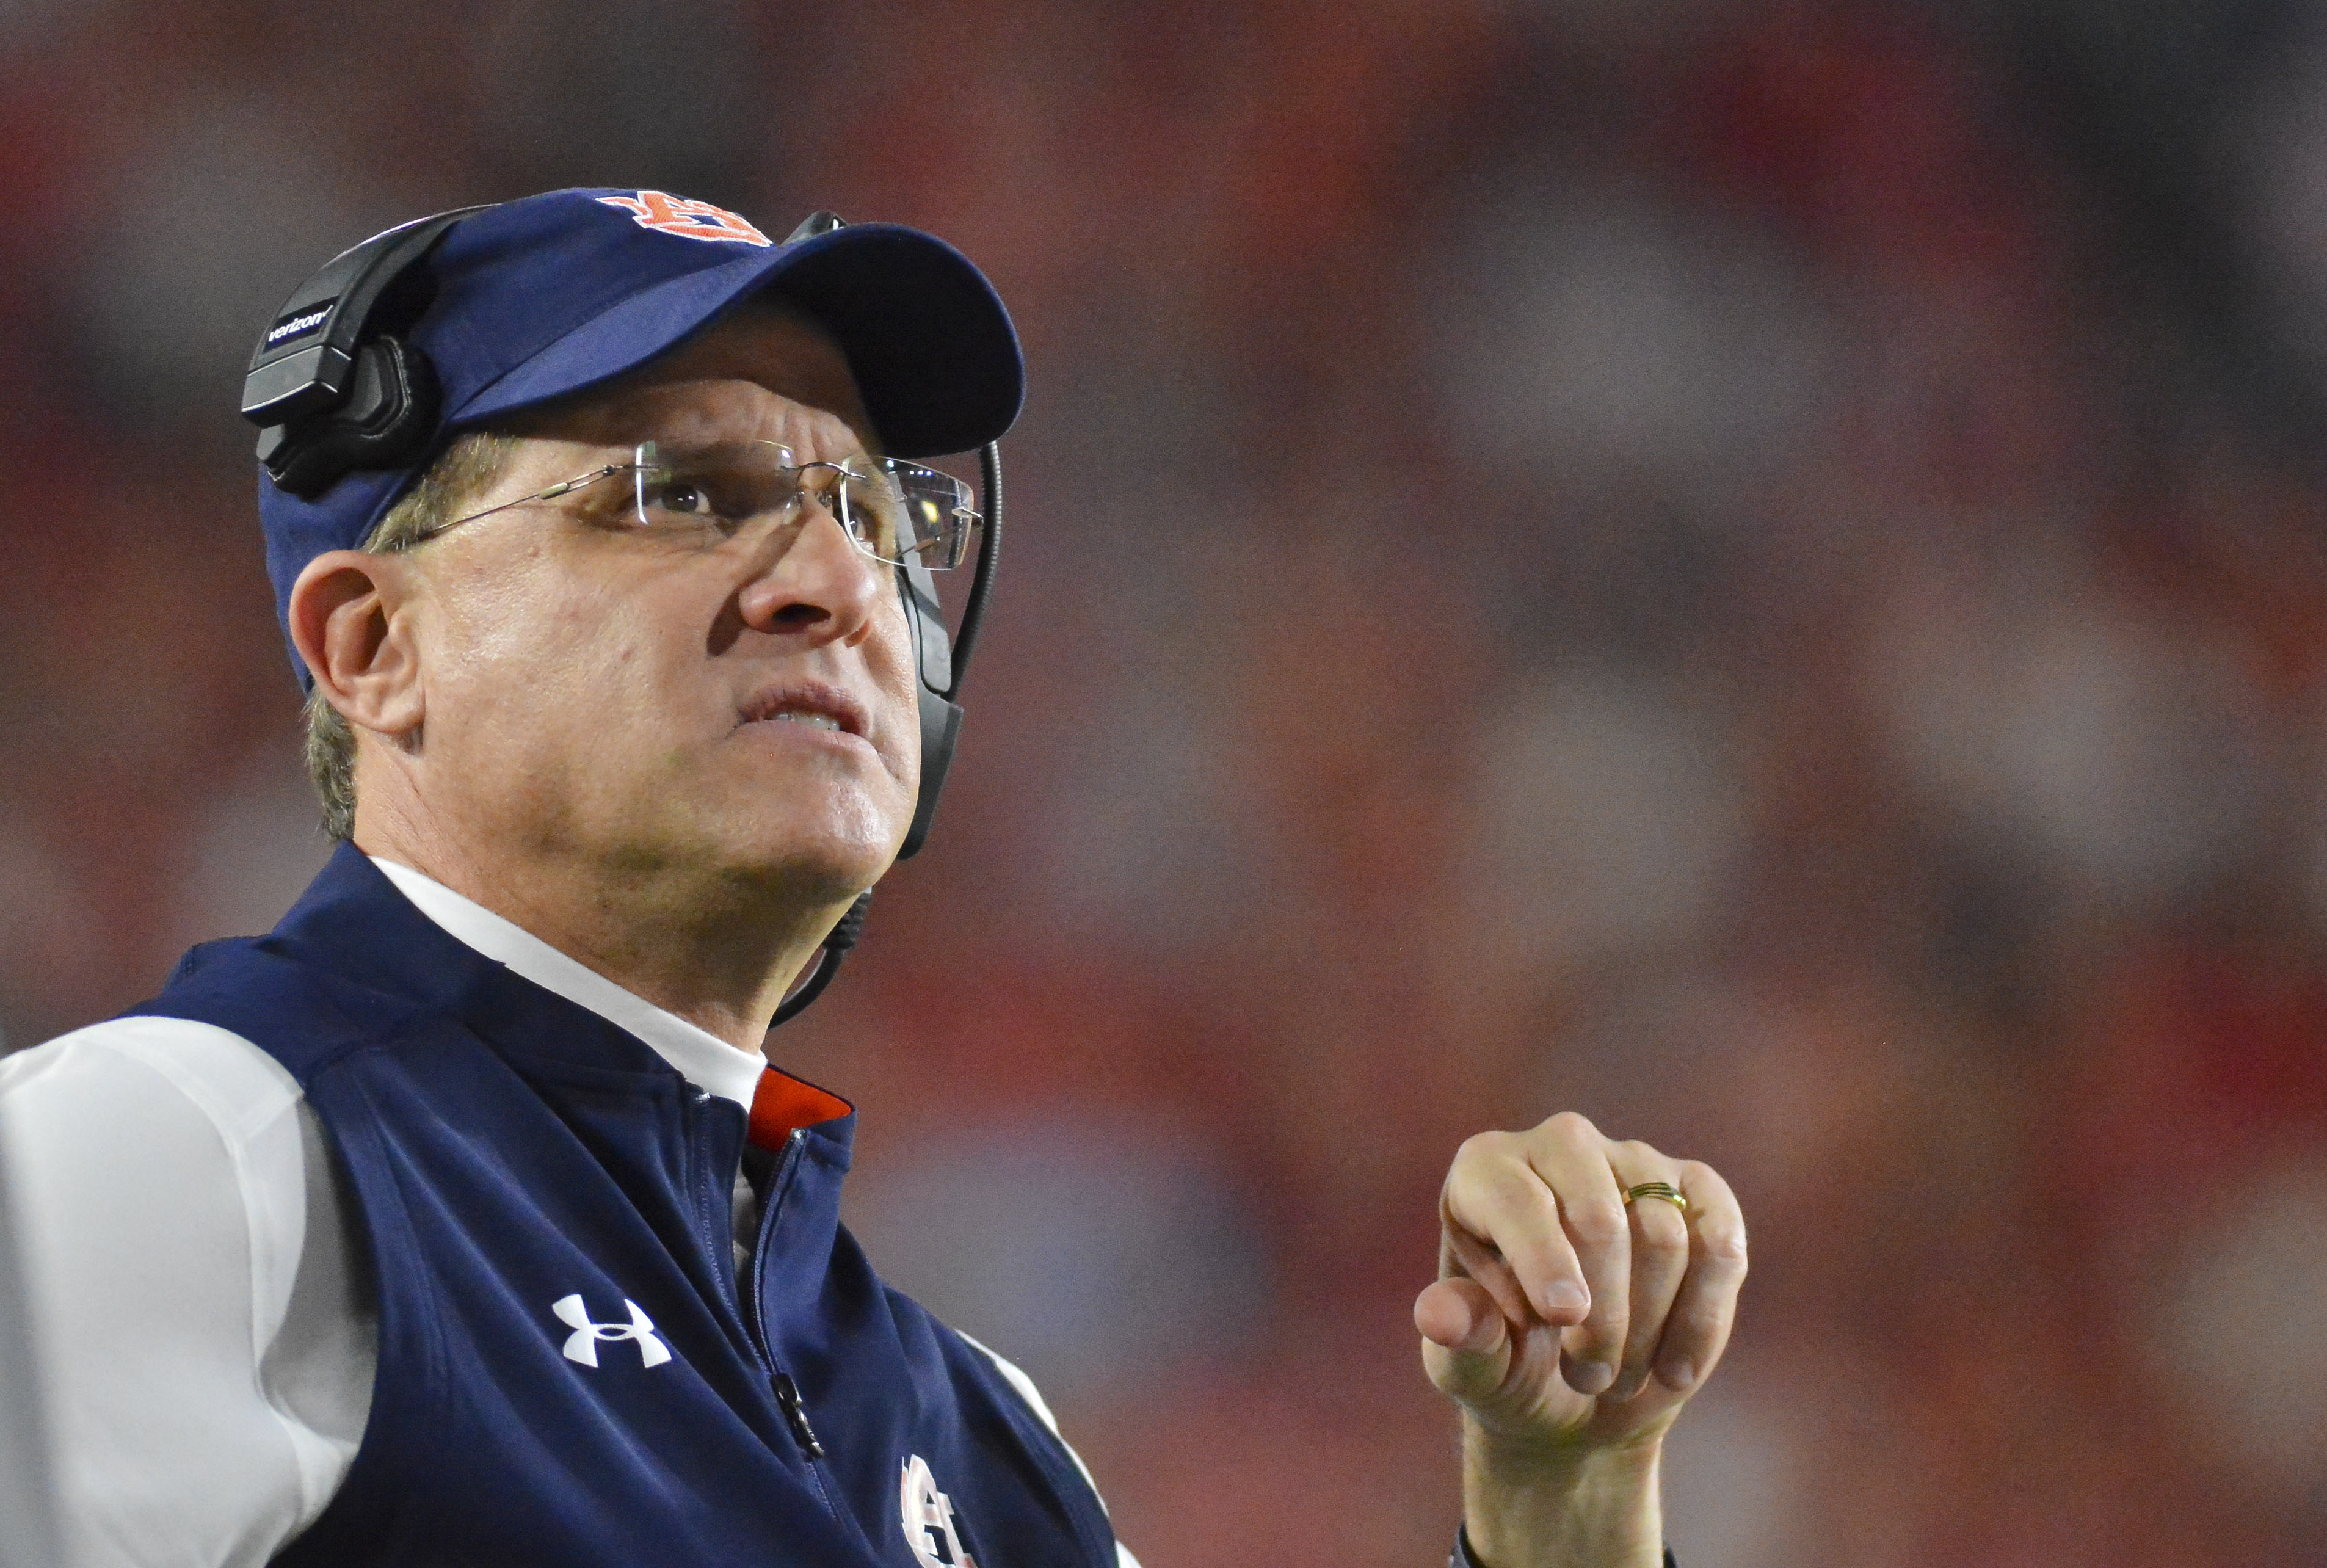 Oct 29, 2016; Oxford, MS, USA; Auburn Tigers head coach Gus Malzahn looks on during the first quarter of the game against the Mississippi Rebels at Vaught-Hemingway Stadium. Mandatory Credit: Matt Bush-USA TODAY Sports